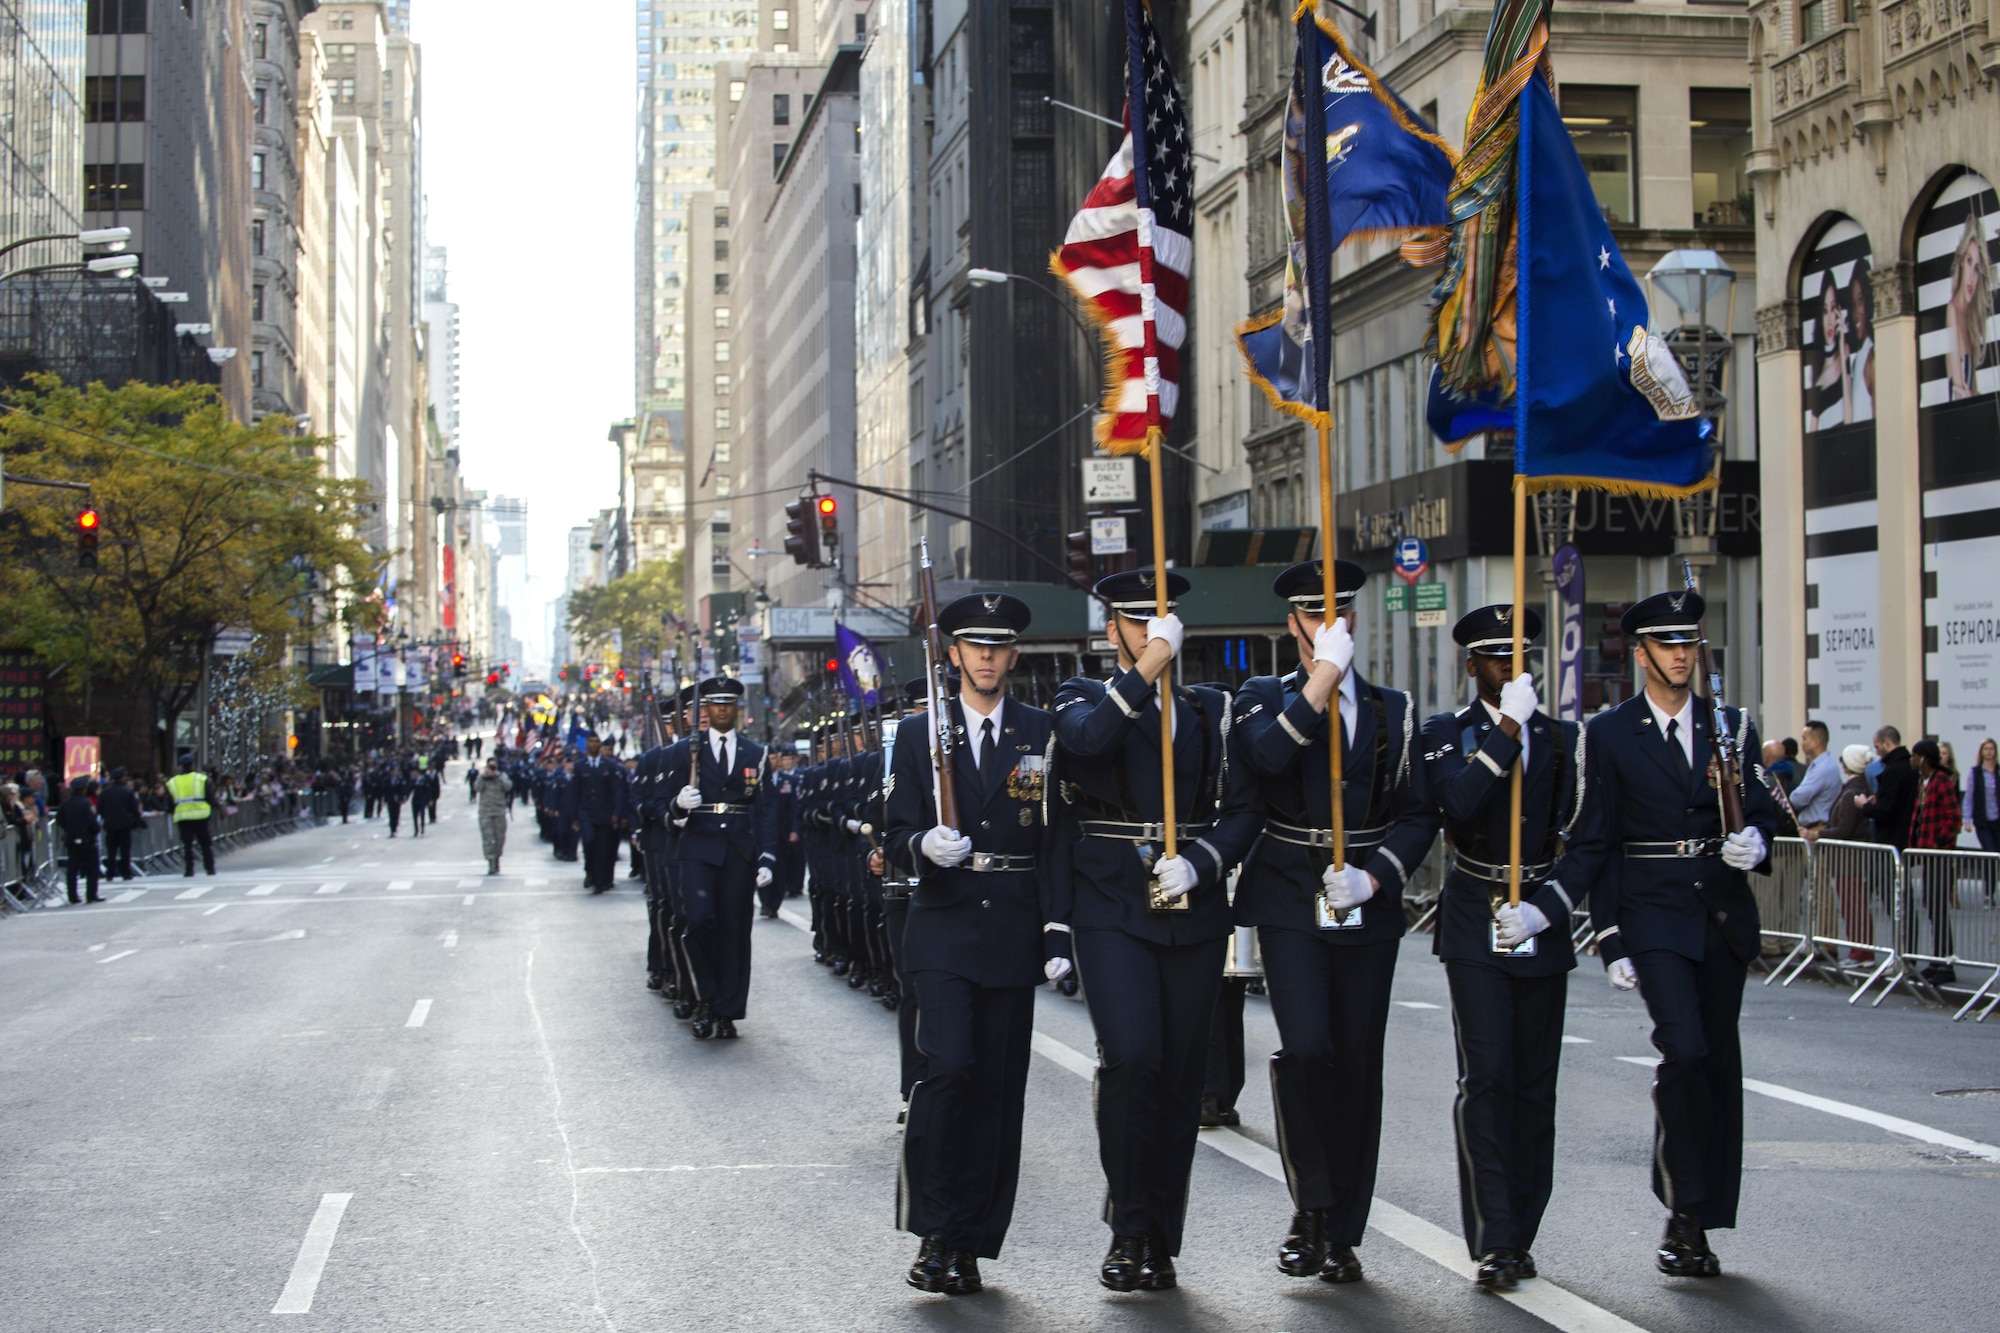 U.S. Air Force Honor Guard marches in the 2016 America’s Parade on Veterans Day down Fifth Avenue in Manhattan New York, Nov. 11, 2016. The parade features more than 250 groups and 20,000 participants, including veterans of all eras, military units, junior ROTC’s, vintage military vehicles and floats. (U.S. Air Force photo by Senior Airman Philip Bryant)